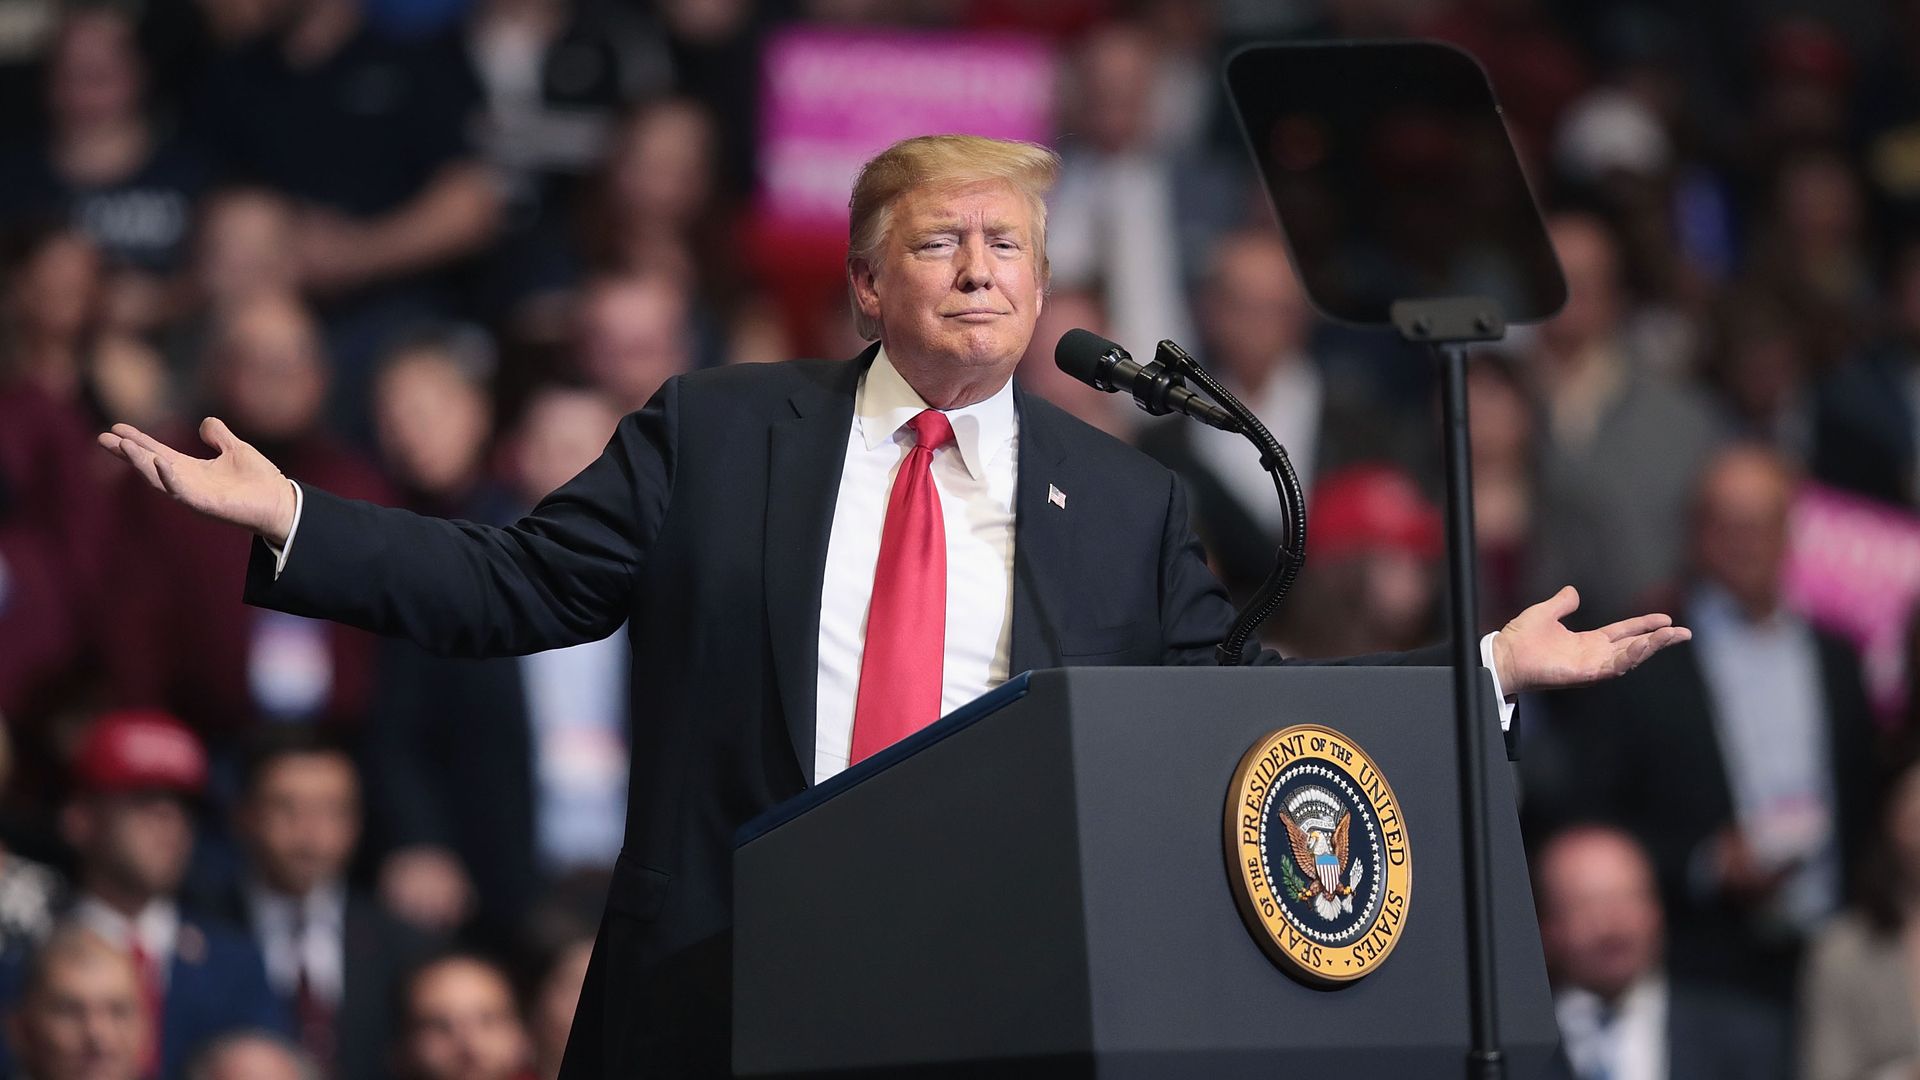 Trump at a rally in 2019. Photo: Scott Olson/Getty Images